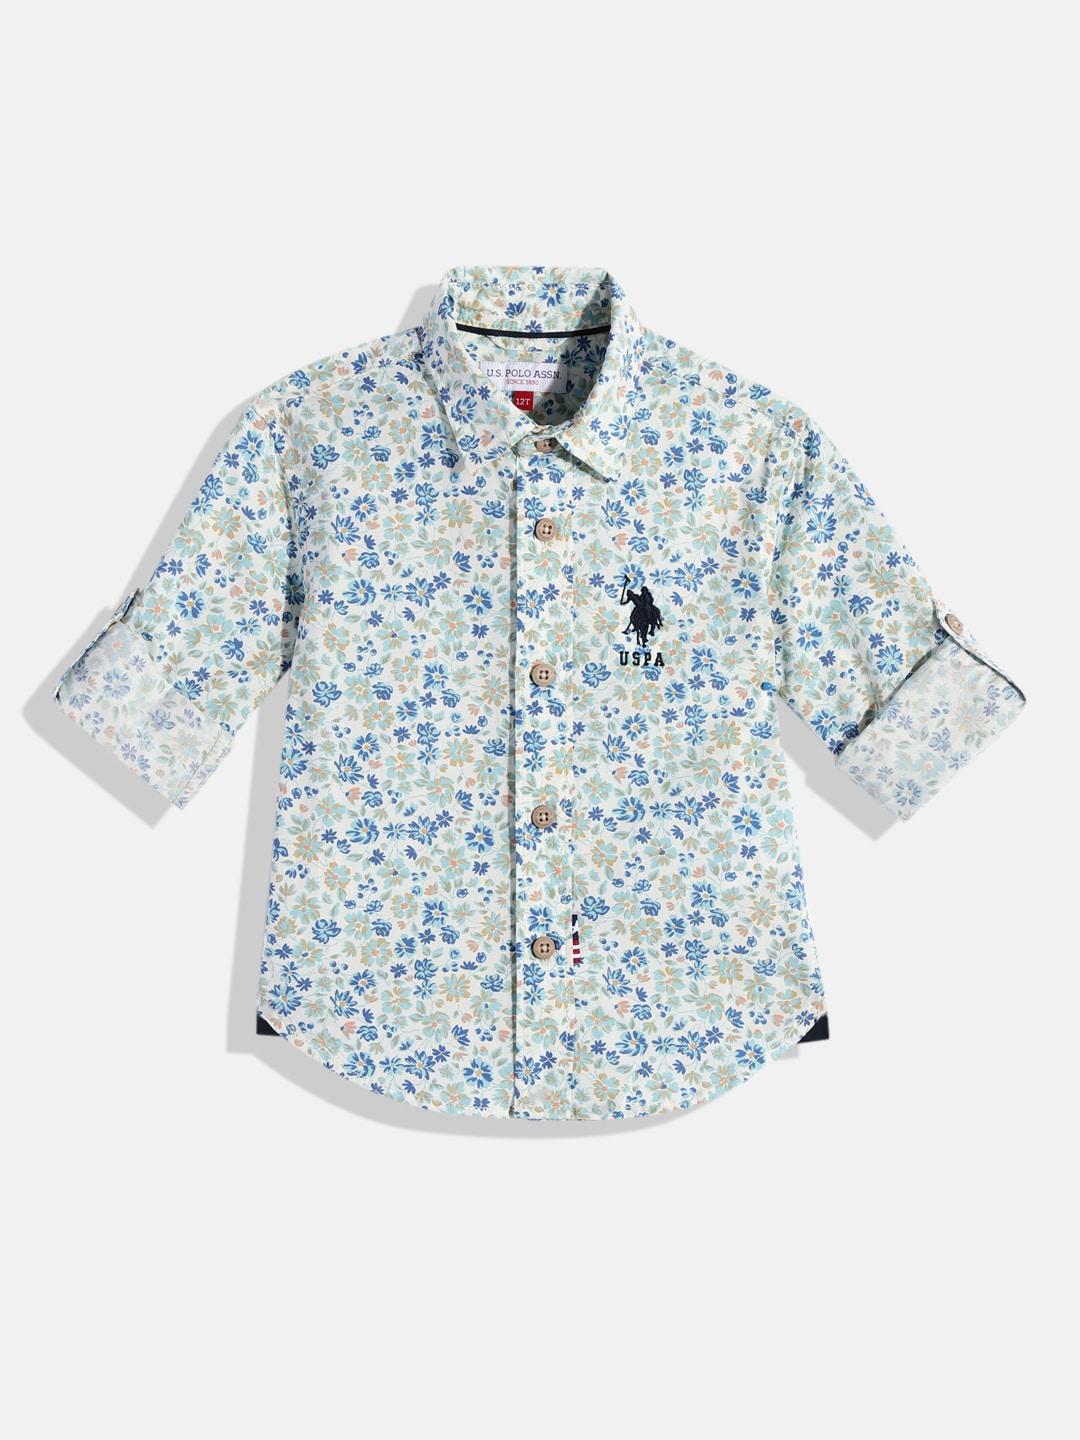 u.s. polo assn. kids boys off -white floral printed pure cotton casual shirt